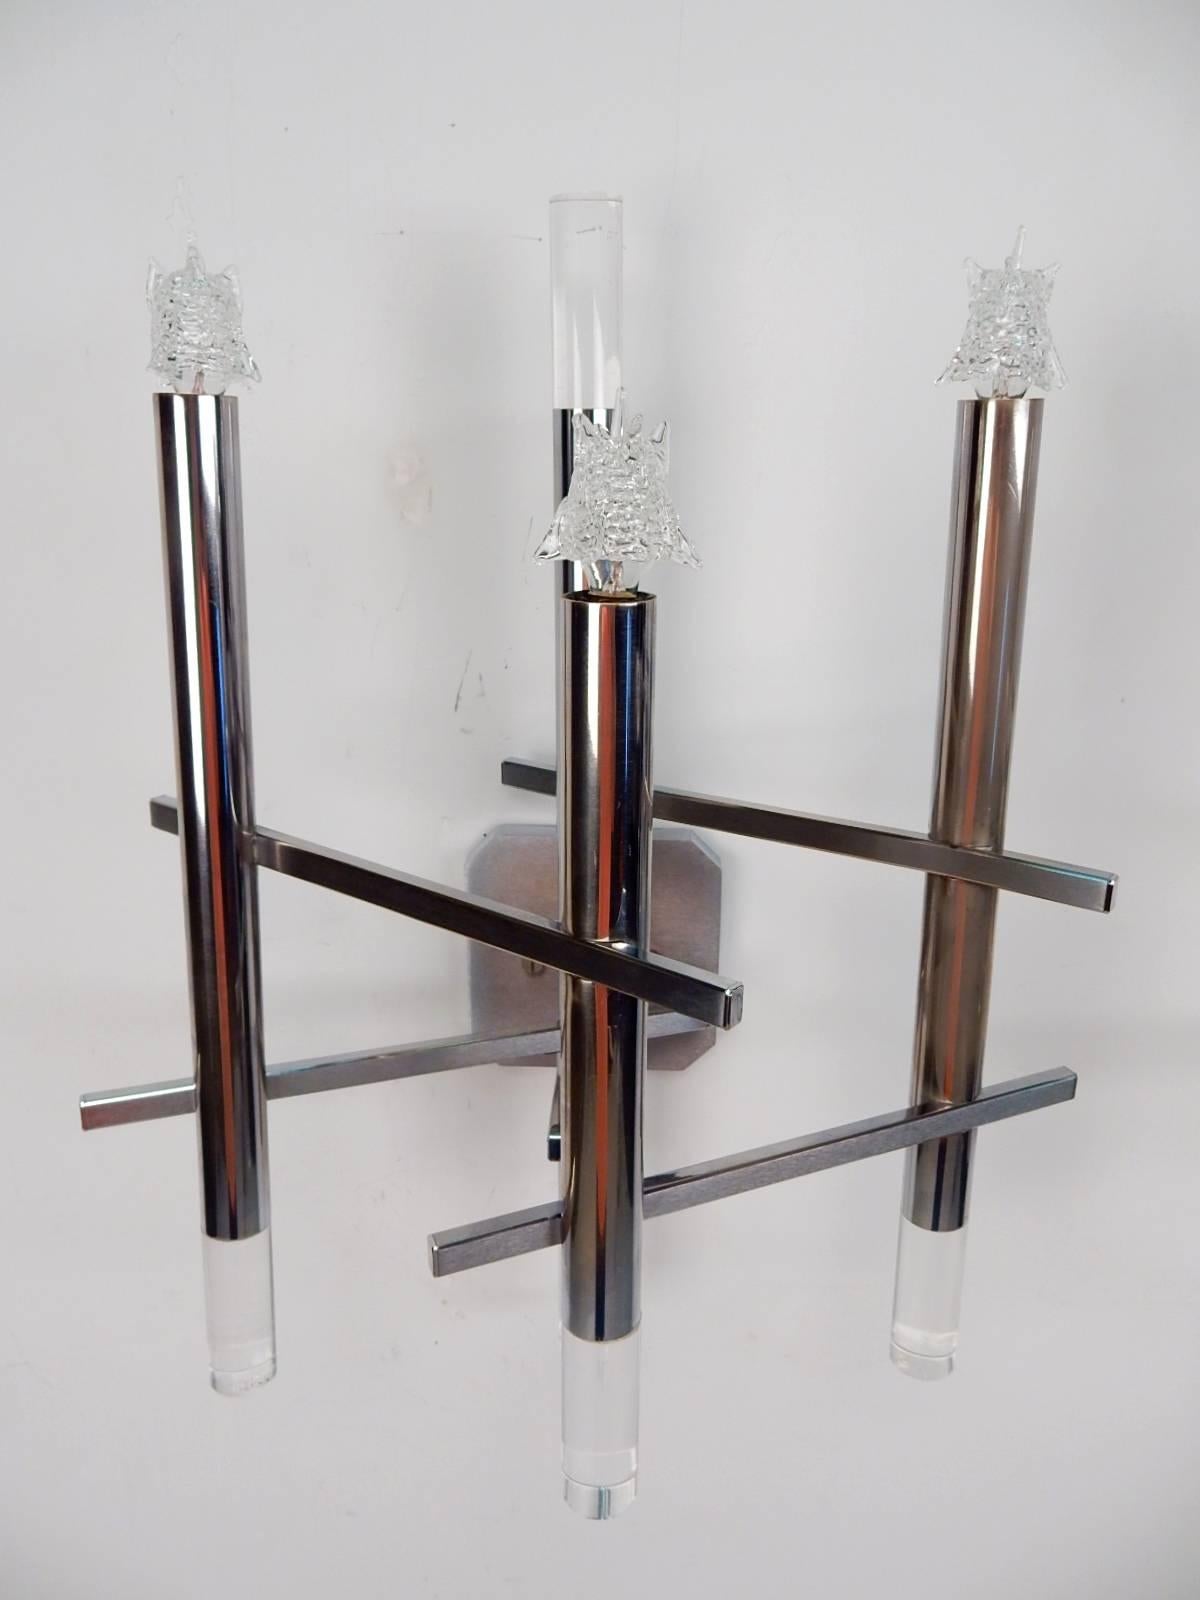 Ultra cool Italian chrome and Lucite wall sconce lamp pair designed by Gaetano Sciolari, circa 1970s.
Asymmetrical chrome candle stick forms with Lucite caps and starlight bulbs.
Both signed Sciolari on rear of wall cap. 
Perfect working order